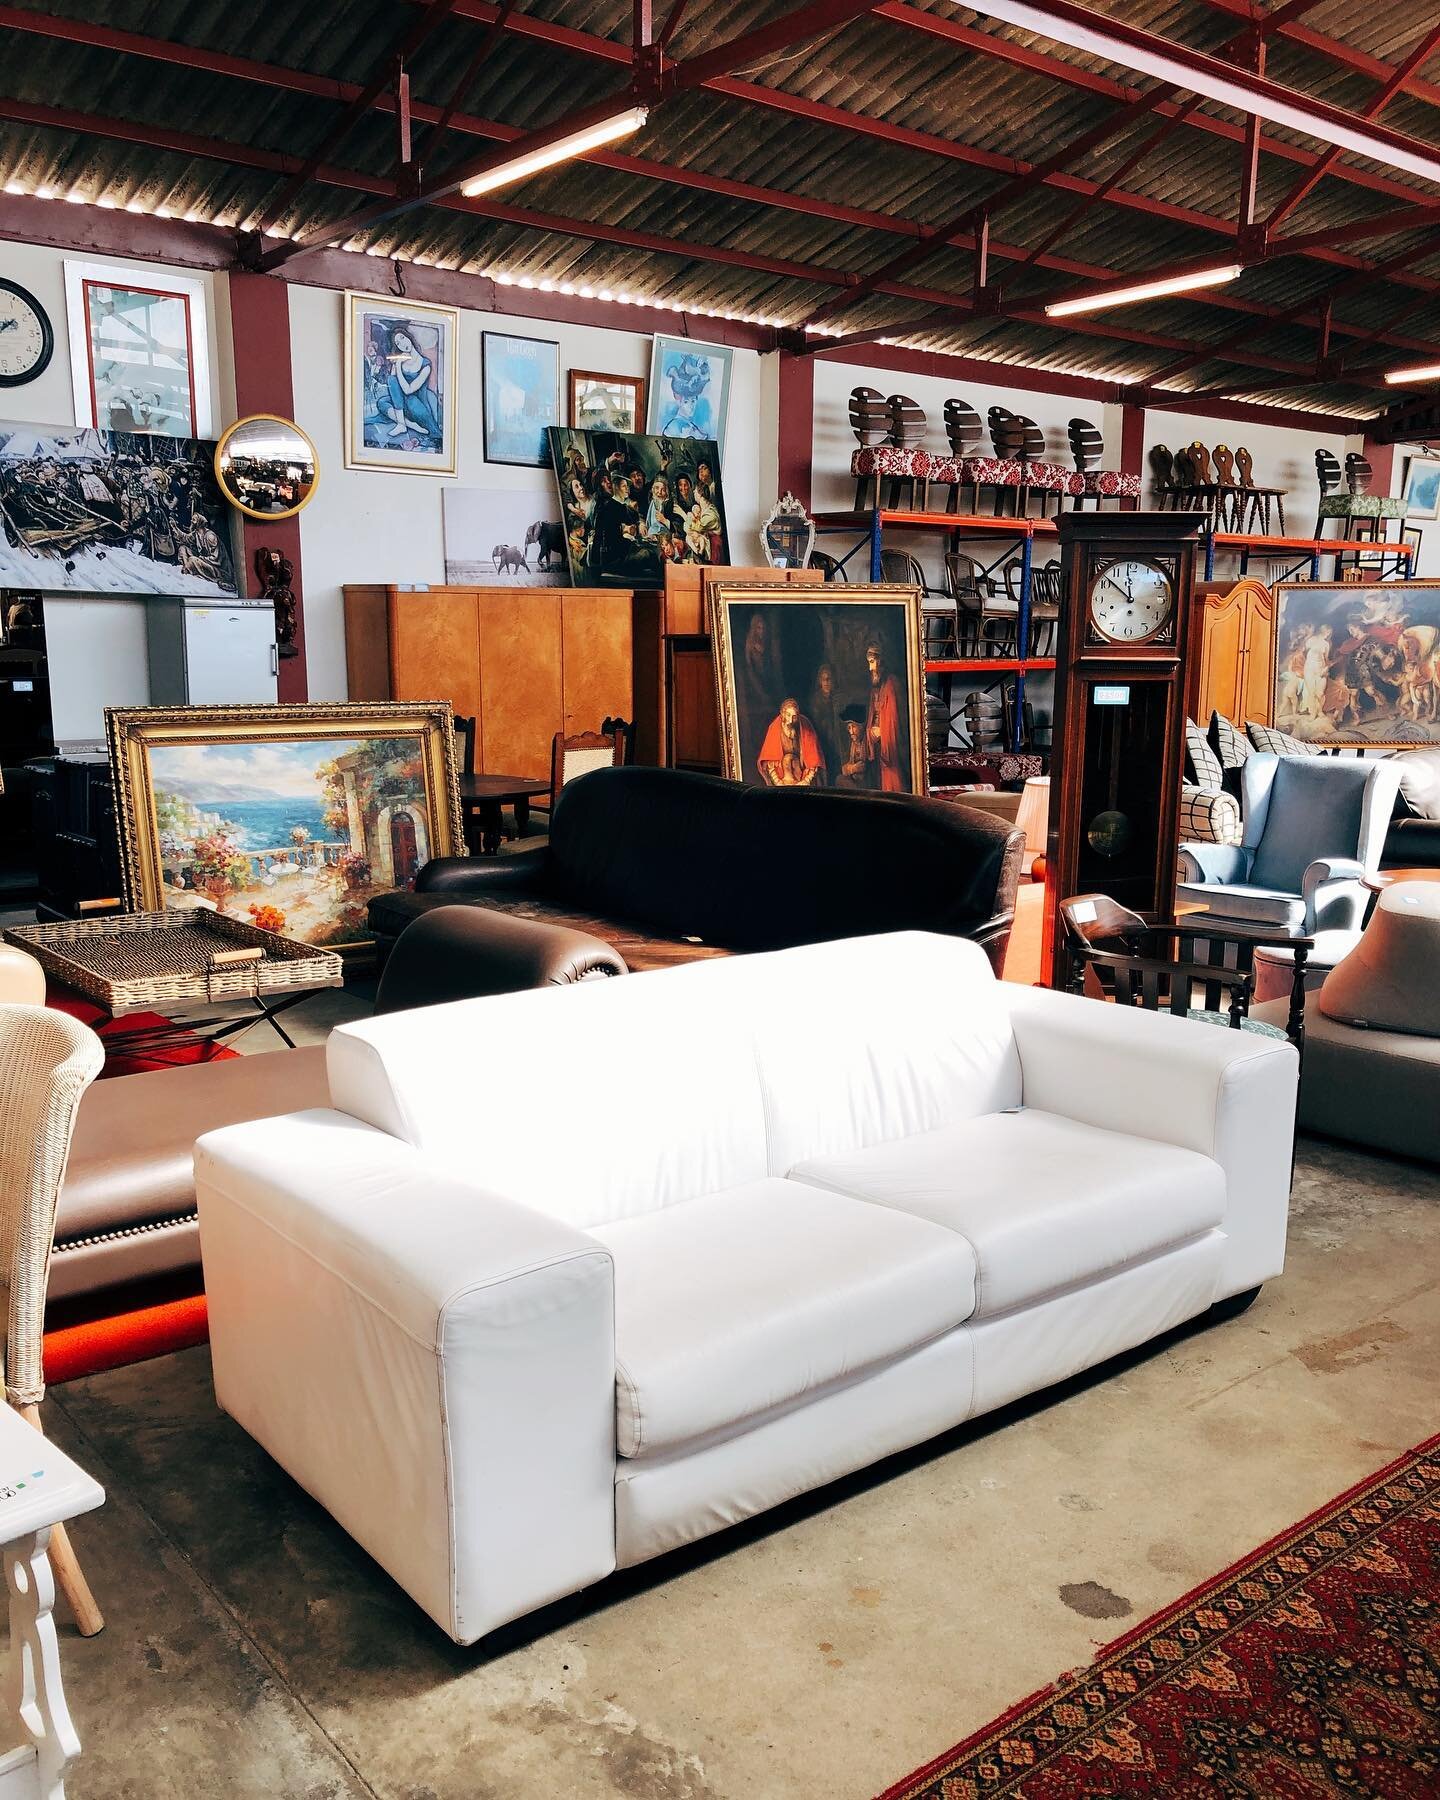 We have some really great leather couches in the shop at the moment.

Stop by for a coffee &amp; a look from Monday - Friday, 9am - 5pm and Saturday, 9am - 1pm.

White 2 Seater Leather Couch
Price: R5950
Length: 2100mm
Depth: 940mm
Height: 780mm

3 S